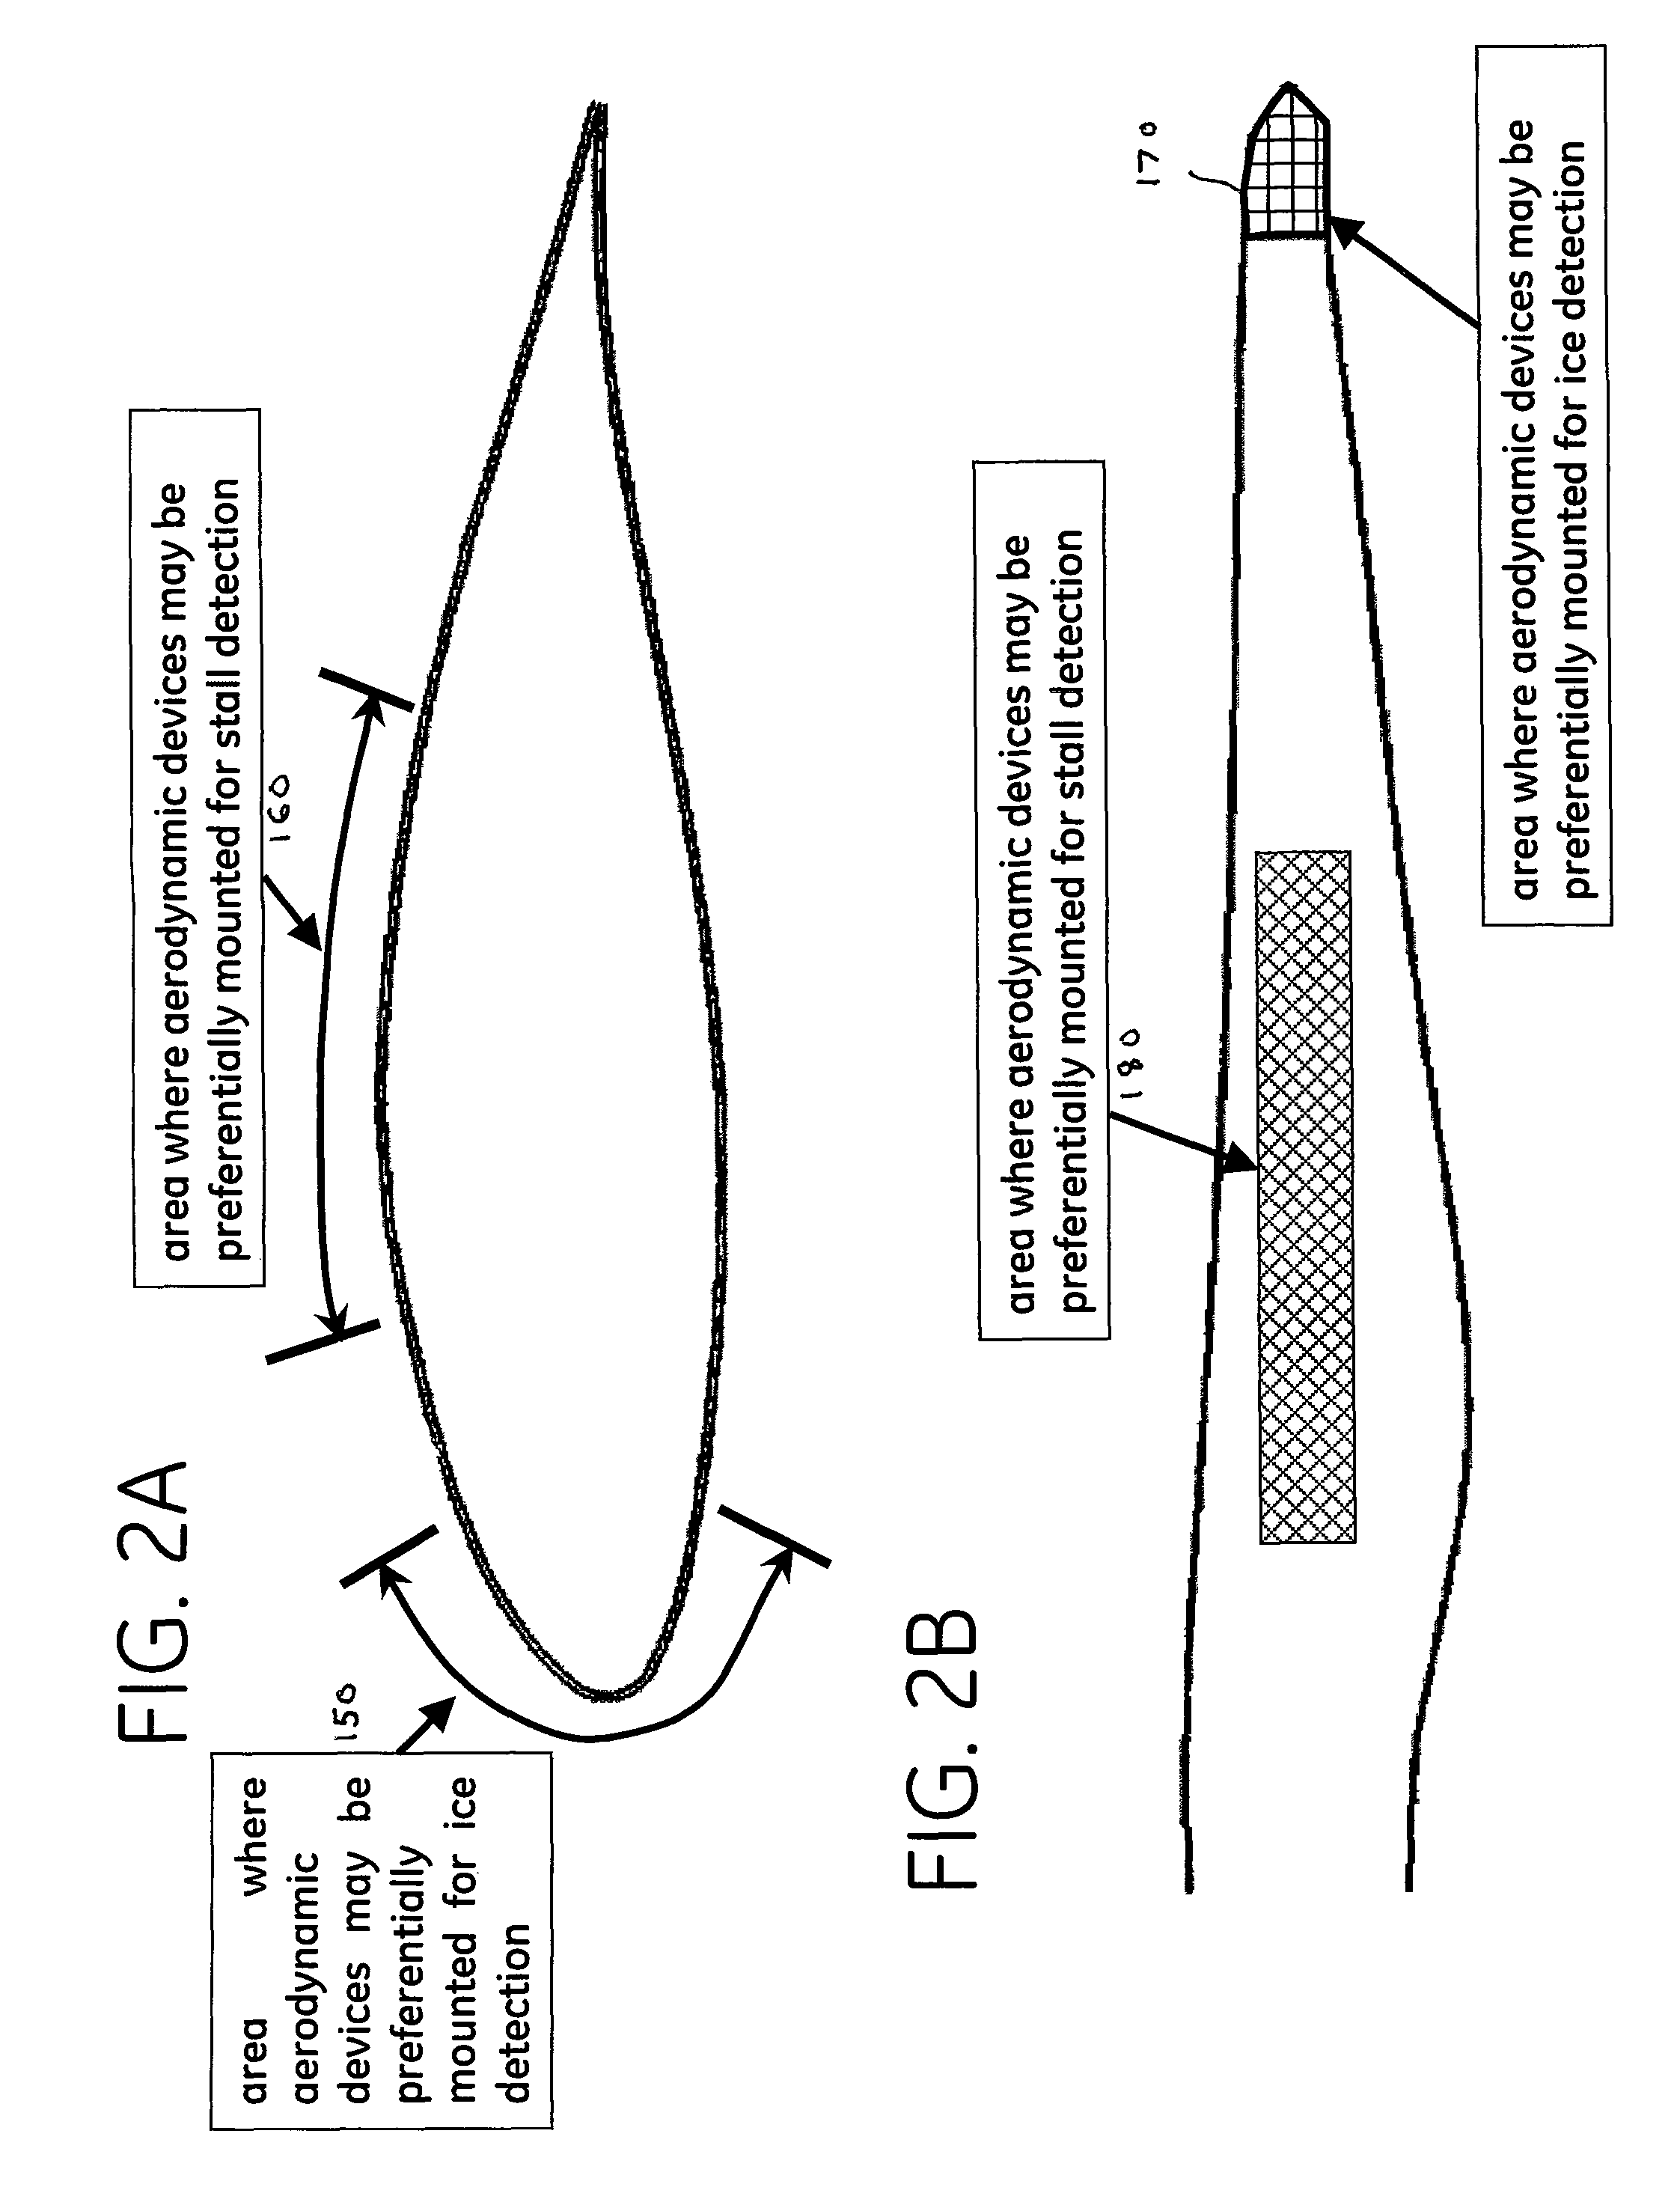 Aerodynamic device for detection of wind turbine blade operation